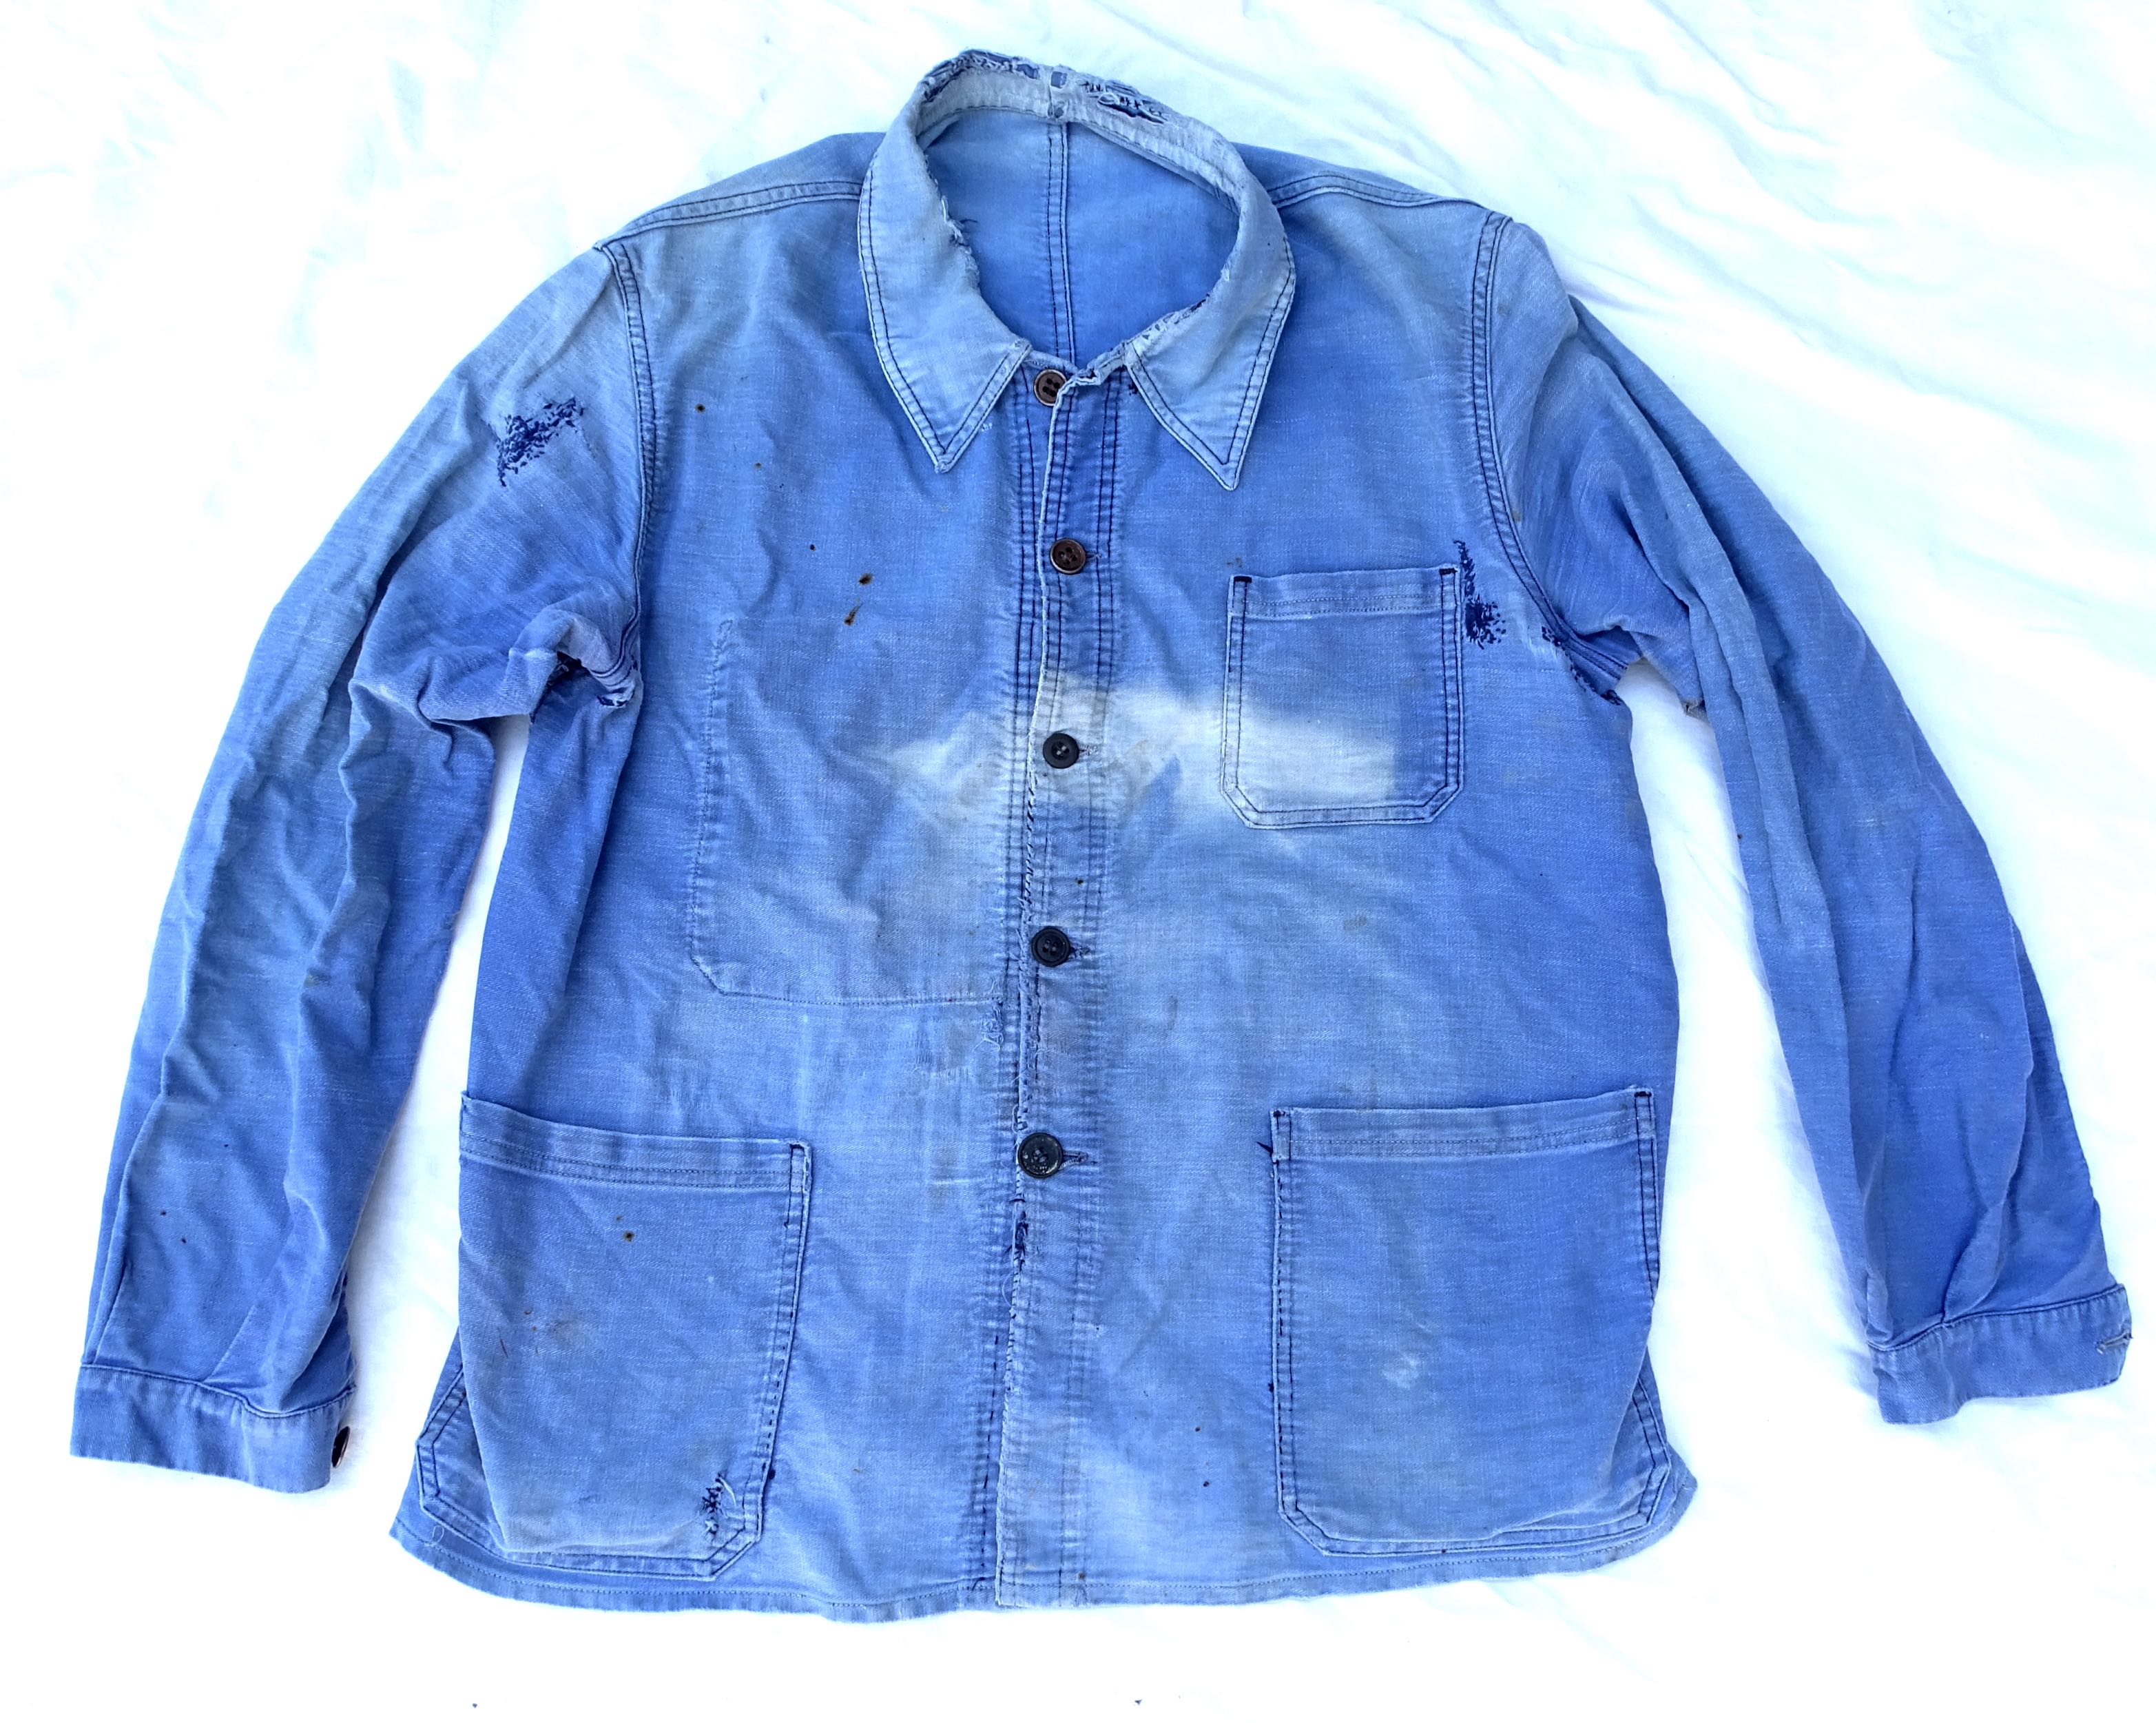 Faded work jacket French made Le Fortex